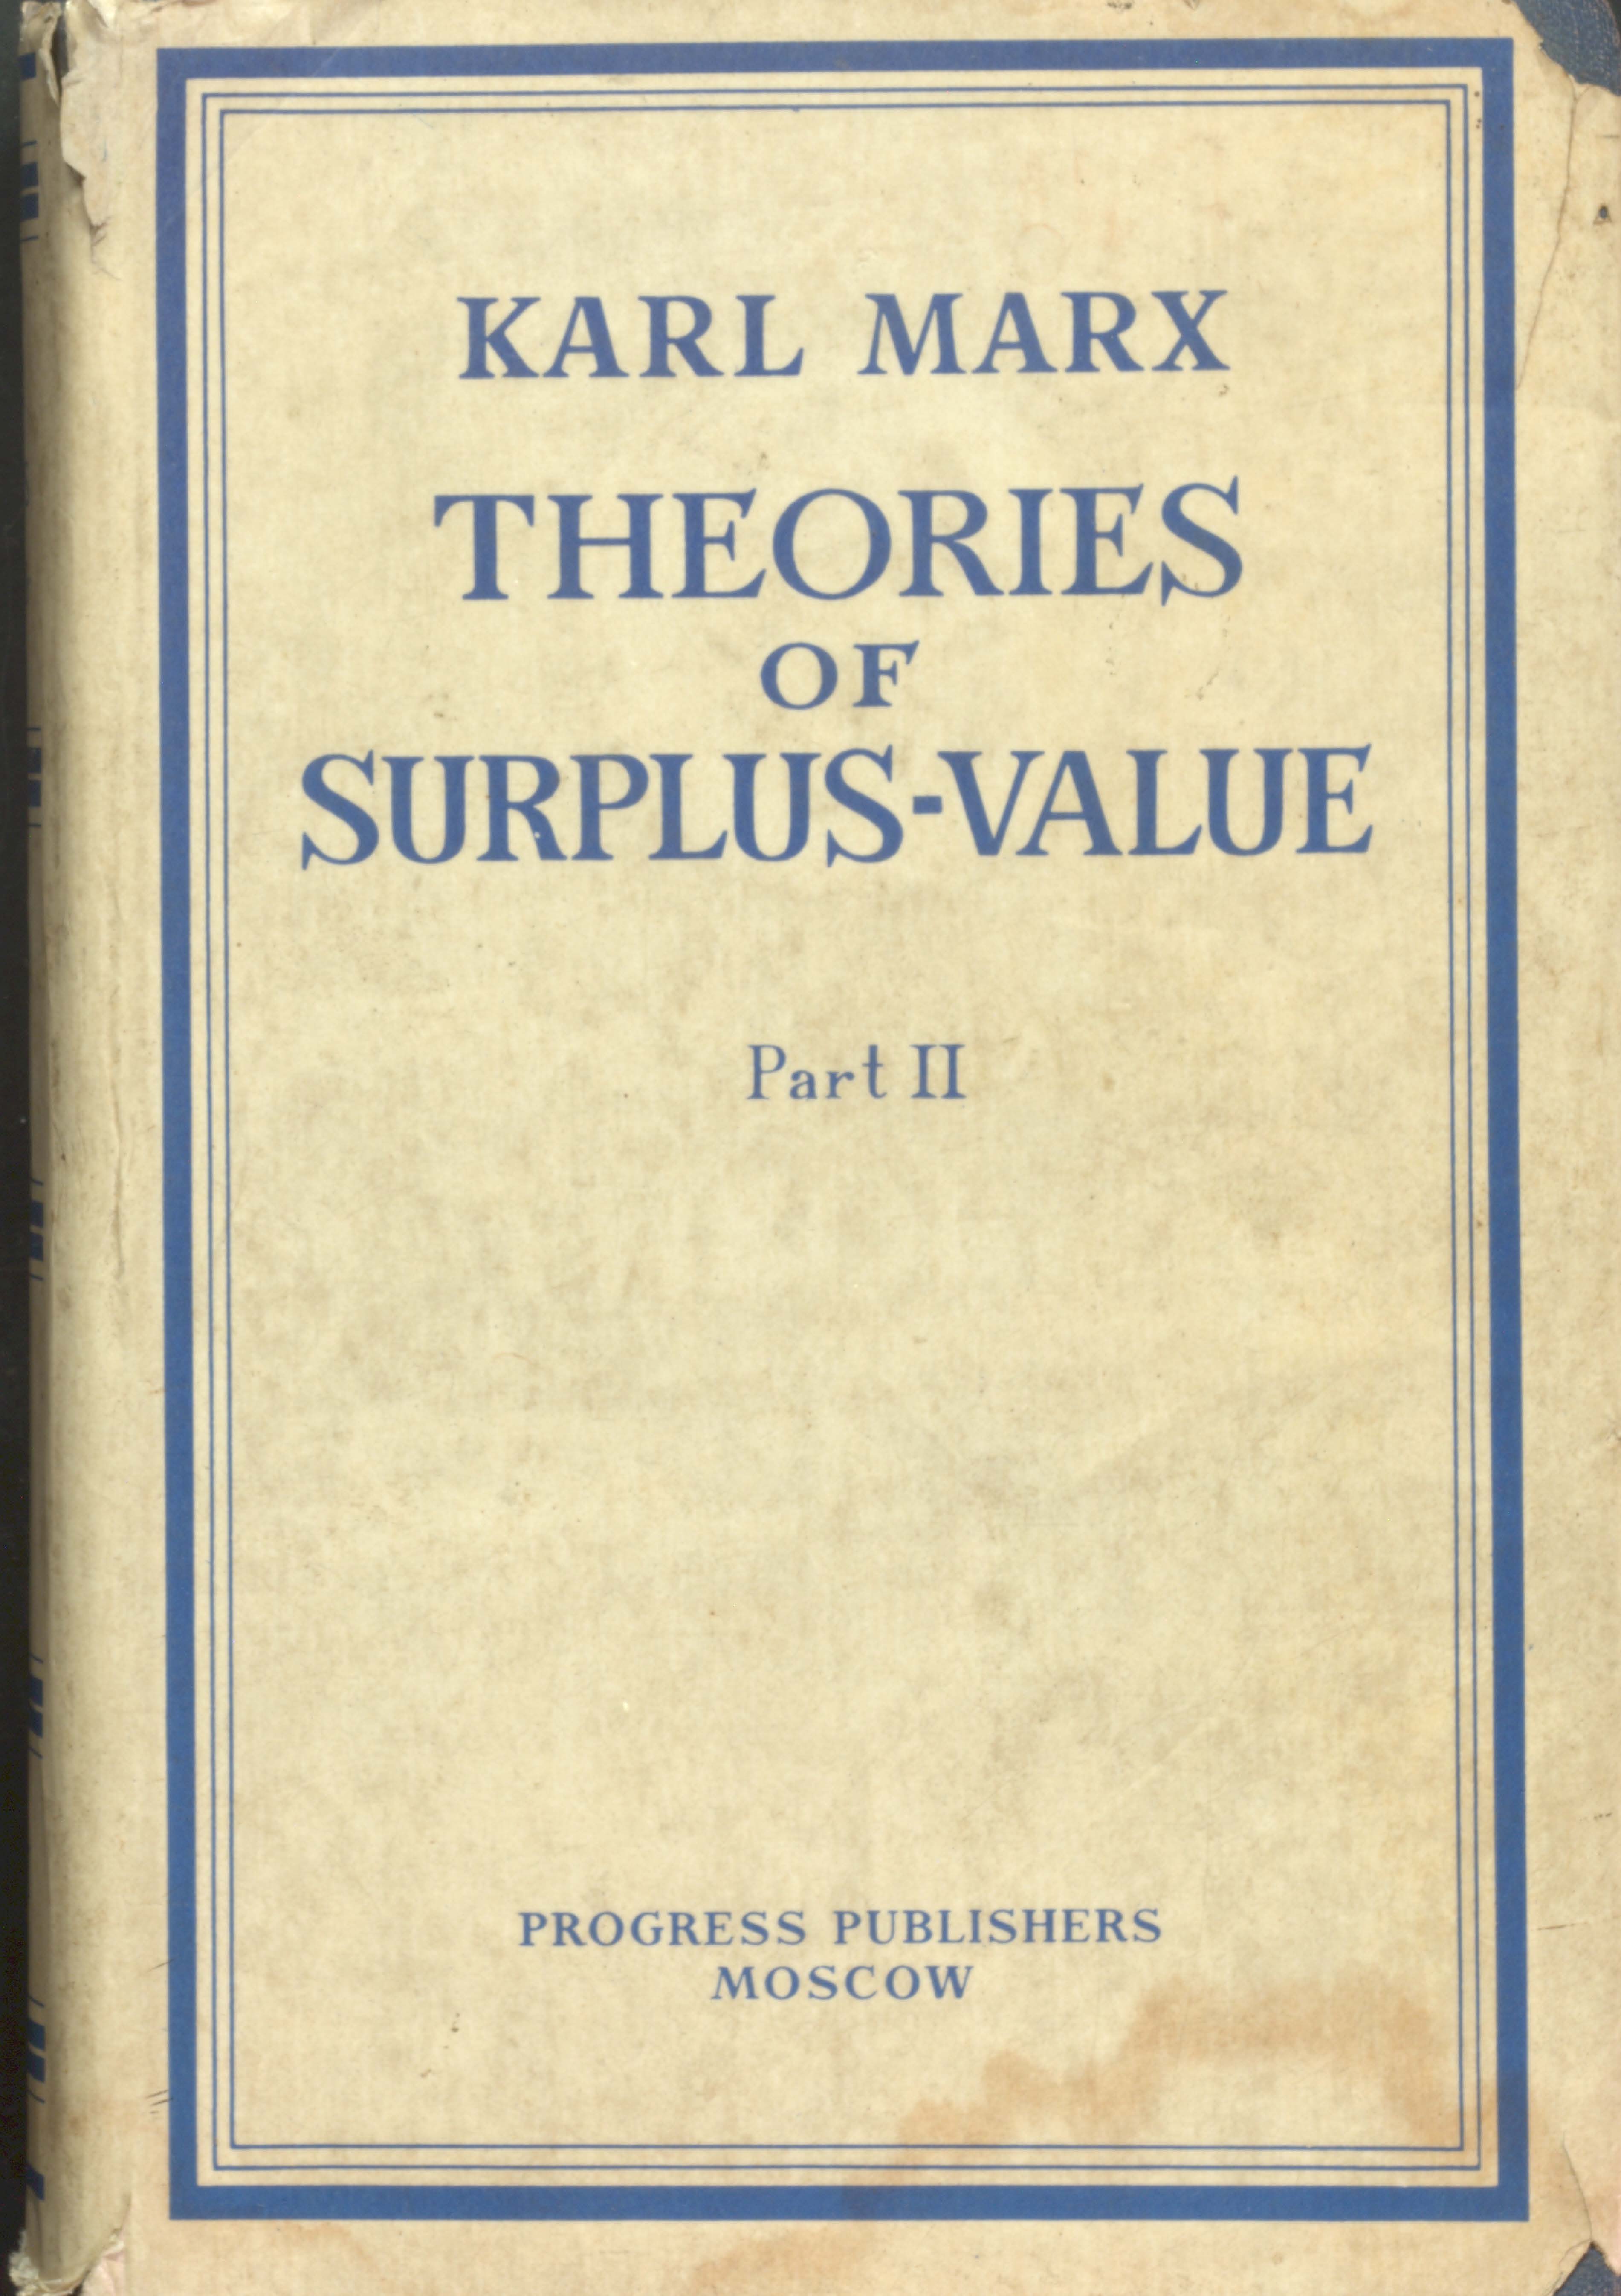 Karl marx theories of surplus value party-ll